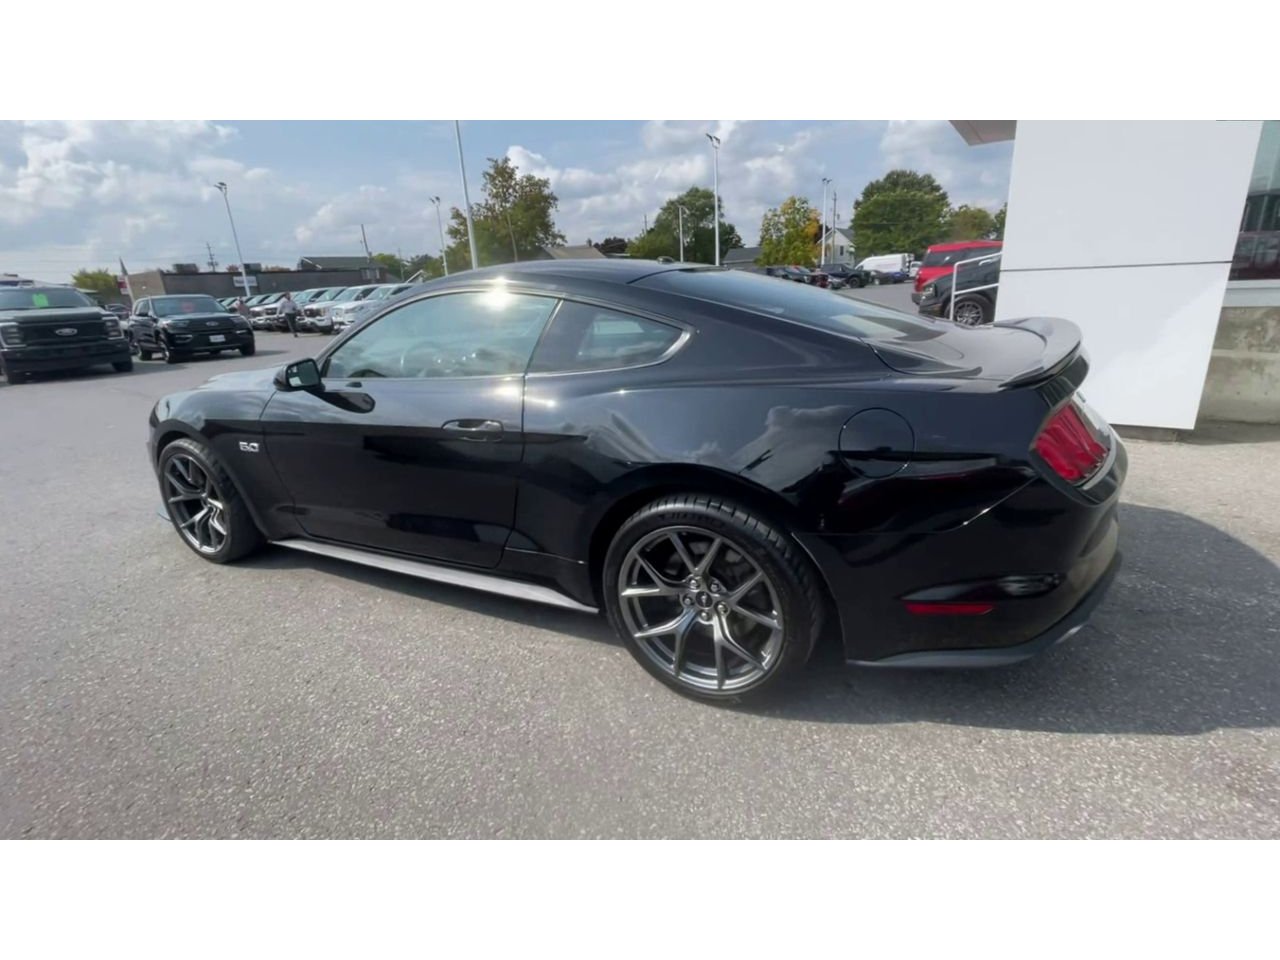 2019 Ford Mustang - P21400 Full Image 6